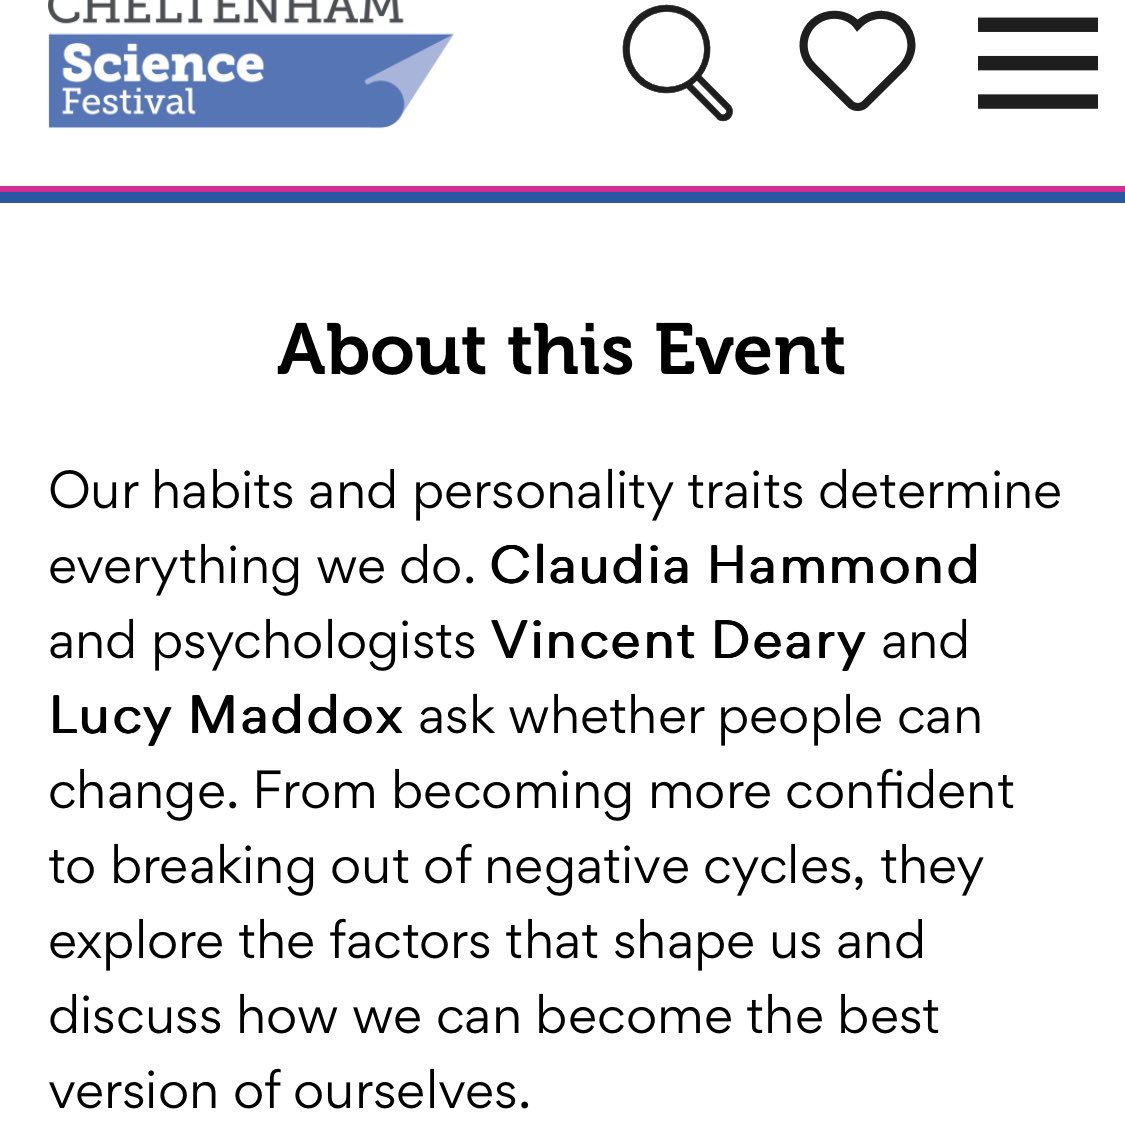 Really enjoying reading @VincentDeary’s book in advance of chatting with him and @claudiahammond for @cheltfestivals on the topic of Can We Change? It’s on Sat 8th June at 5.30 if you fancy coming along: cheltenhamfestivals.com/science/whats-…